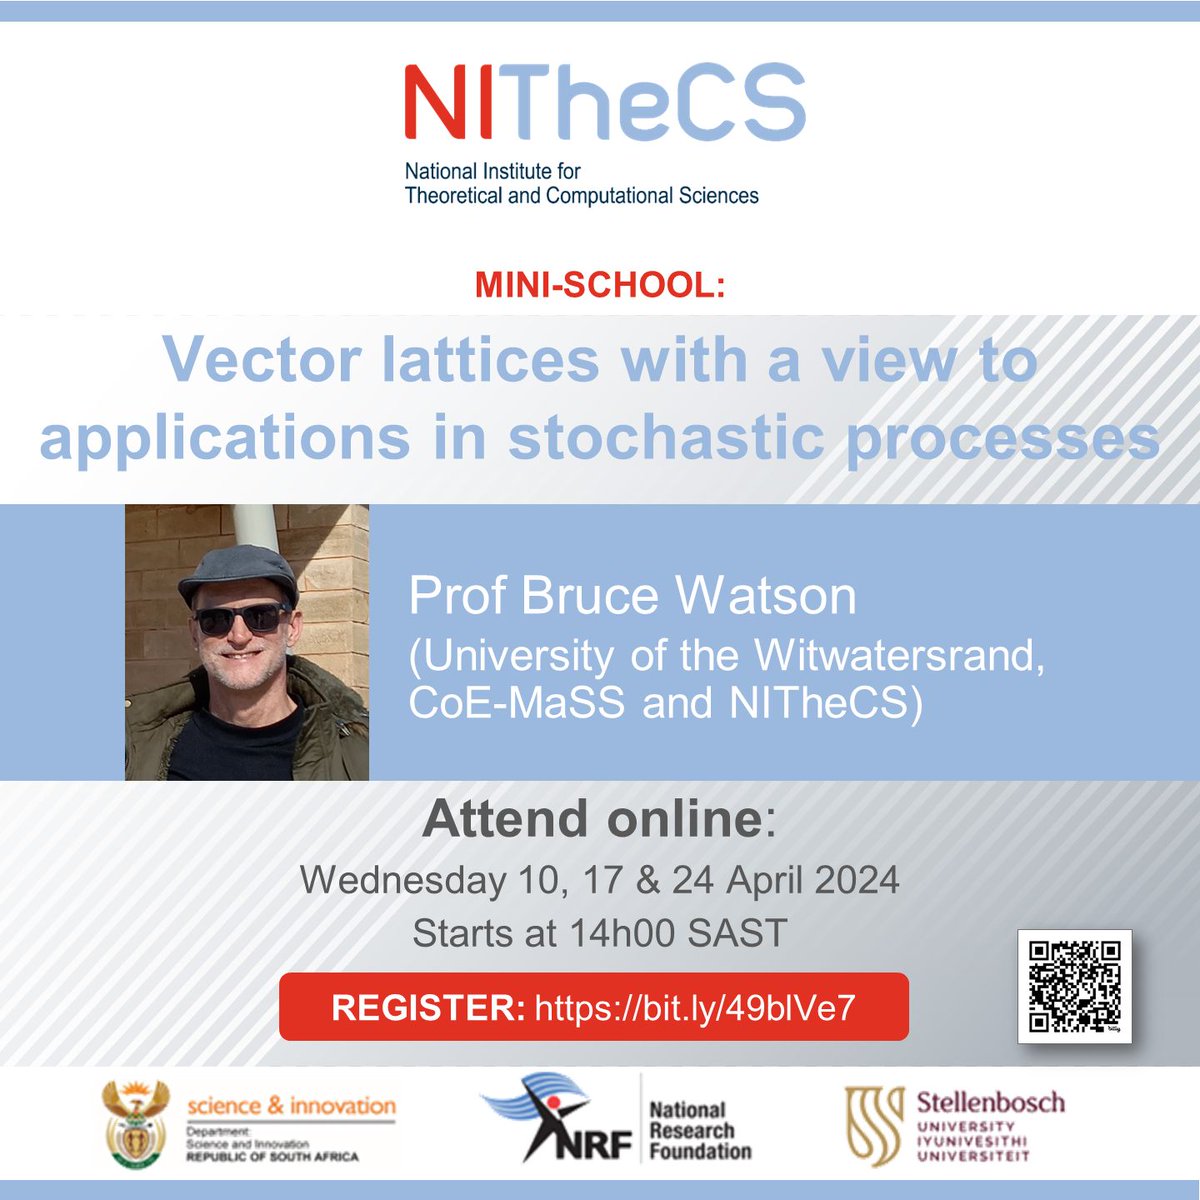 Reminder - NITheCS Mini-school: 'Vector lattices with a view to applications in stochastic processes' - Prof Bruce Watson - Wed 10, 17 & 24 Apr @ 14h00 SAST. Starts today - attend online. buff.ly/3JdB3wZ #mathematics #stochastic #vectorlattices #rieszspace